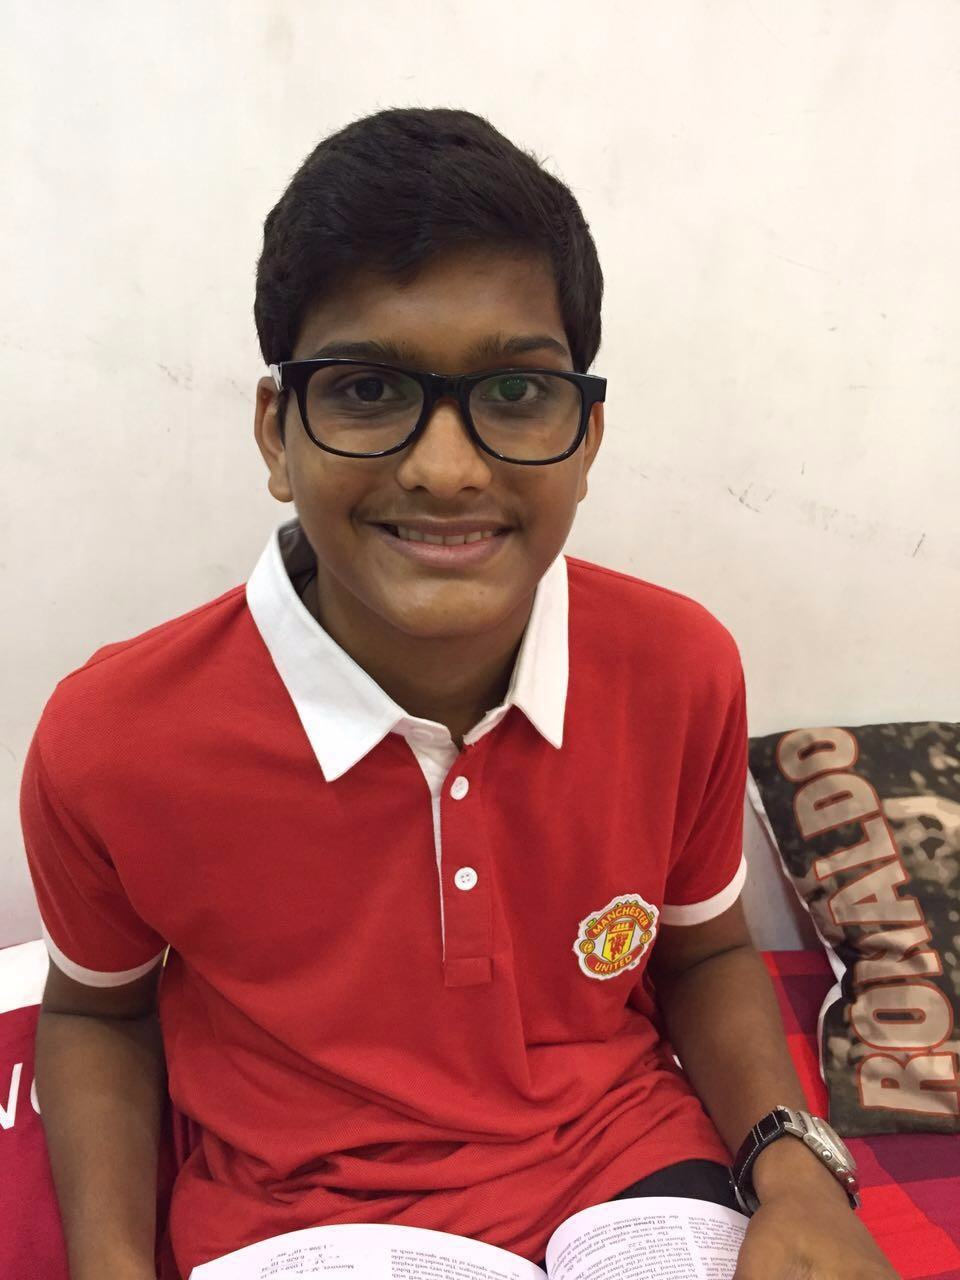 16-year-old cancer patient scores 95.8% in Class X